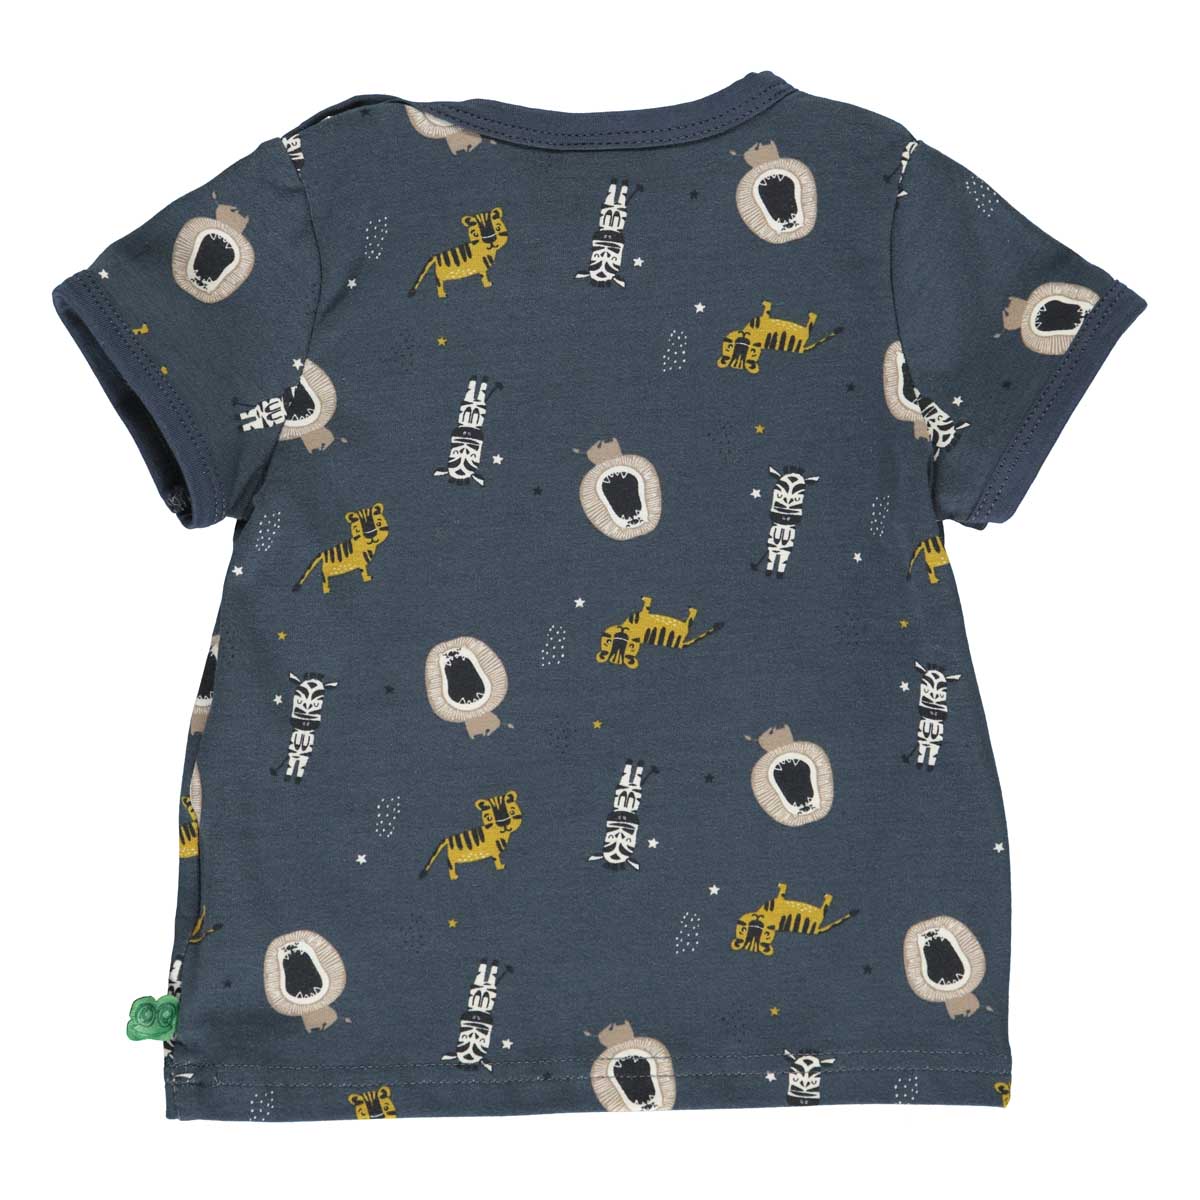 T-Shirt Zootiere Fred s World